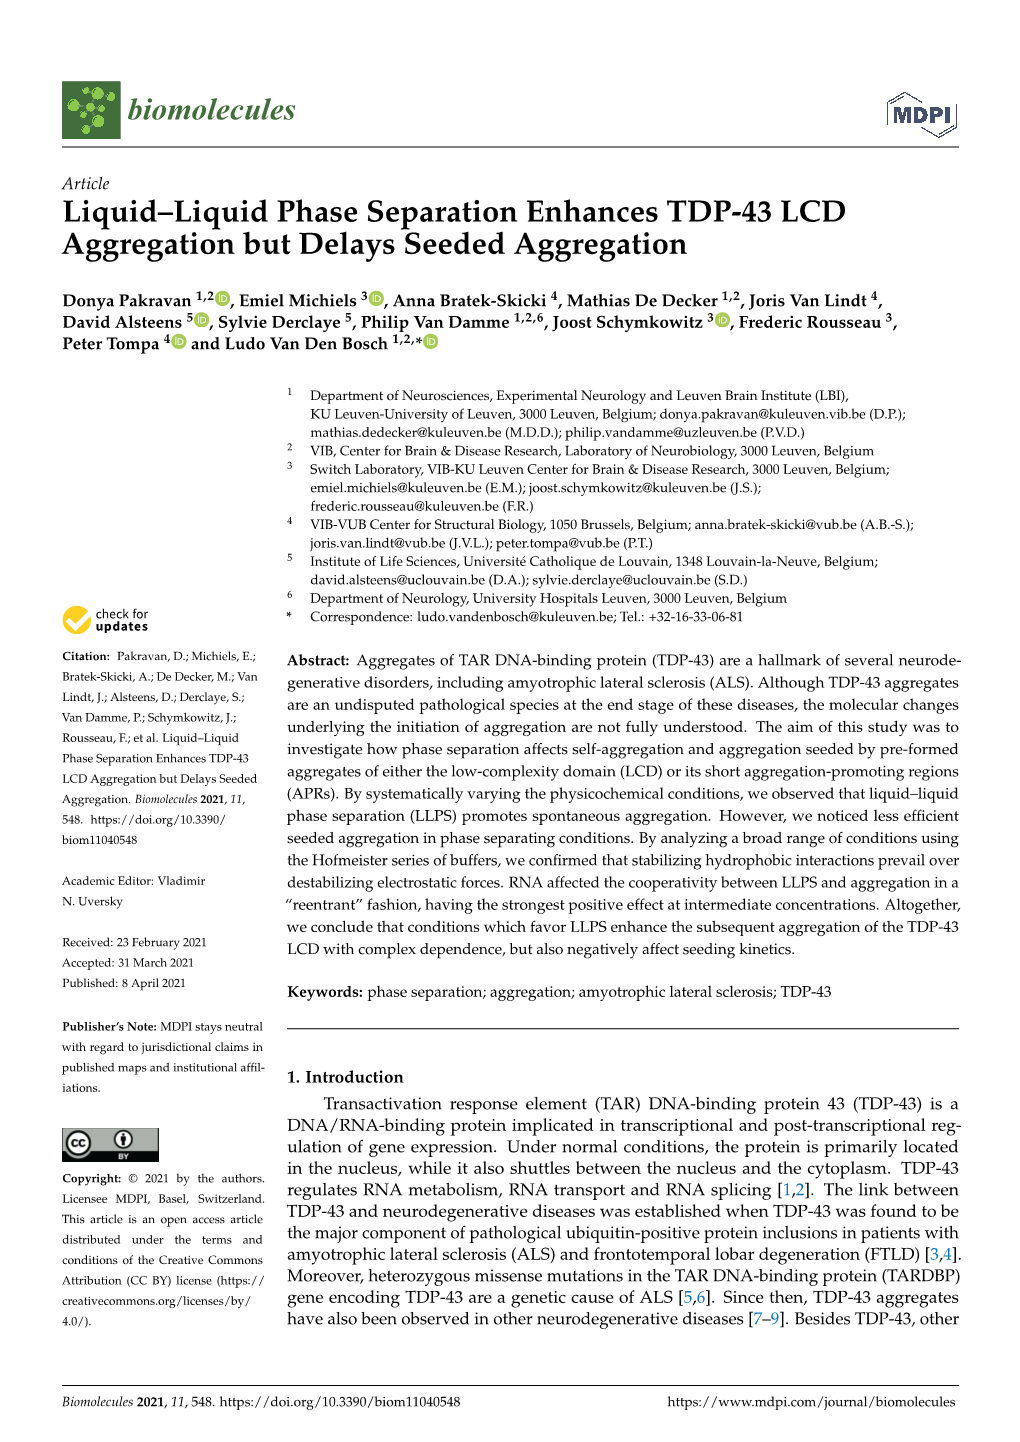 Liquid–Liquid Phase Separation Enhances TDP-43 LCD Aggregation but Delays Seeded Aggregation